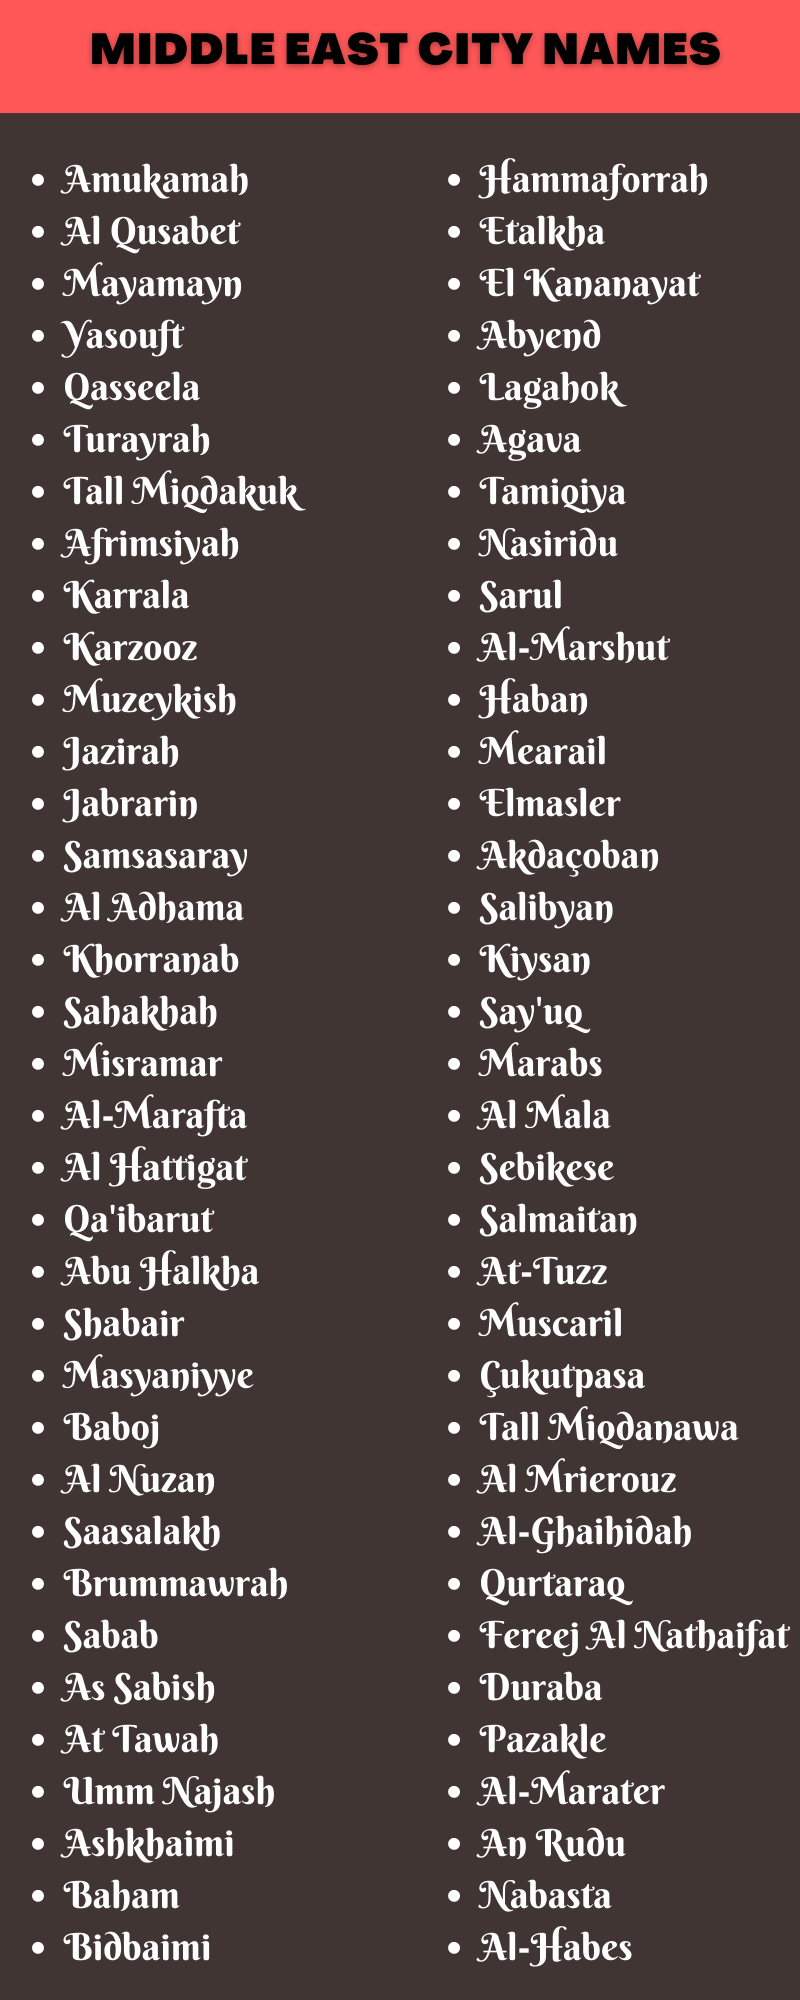 Middle East City Names